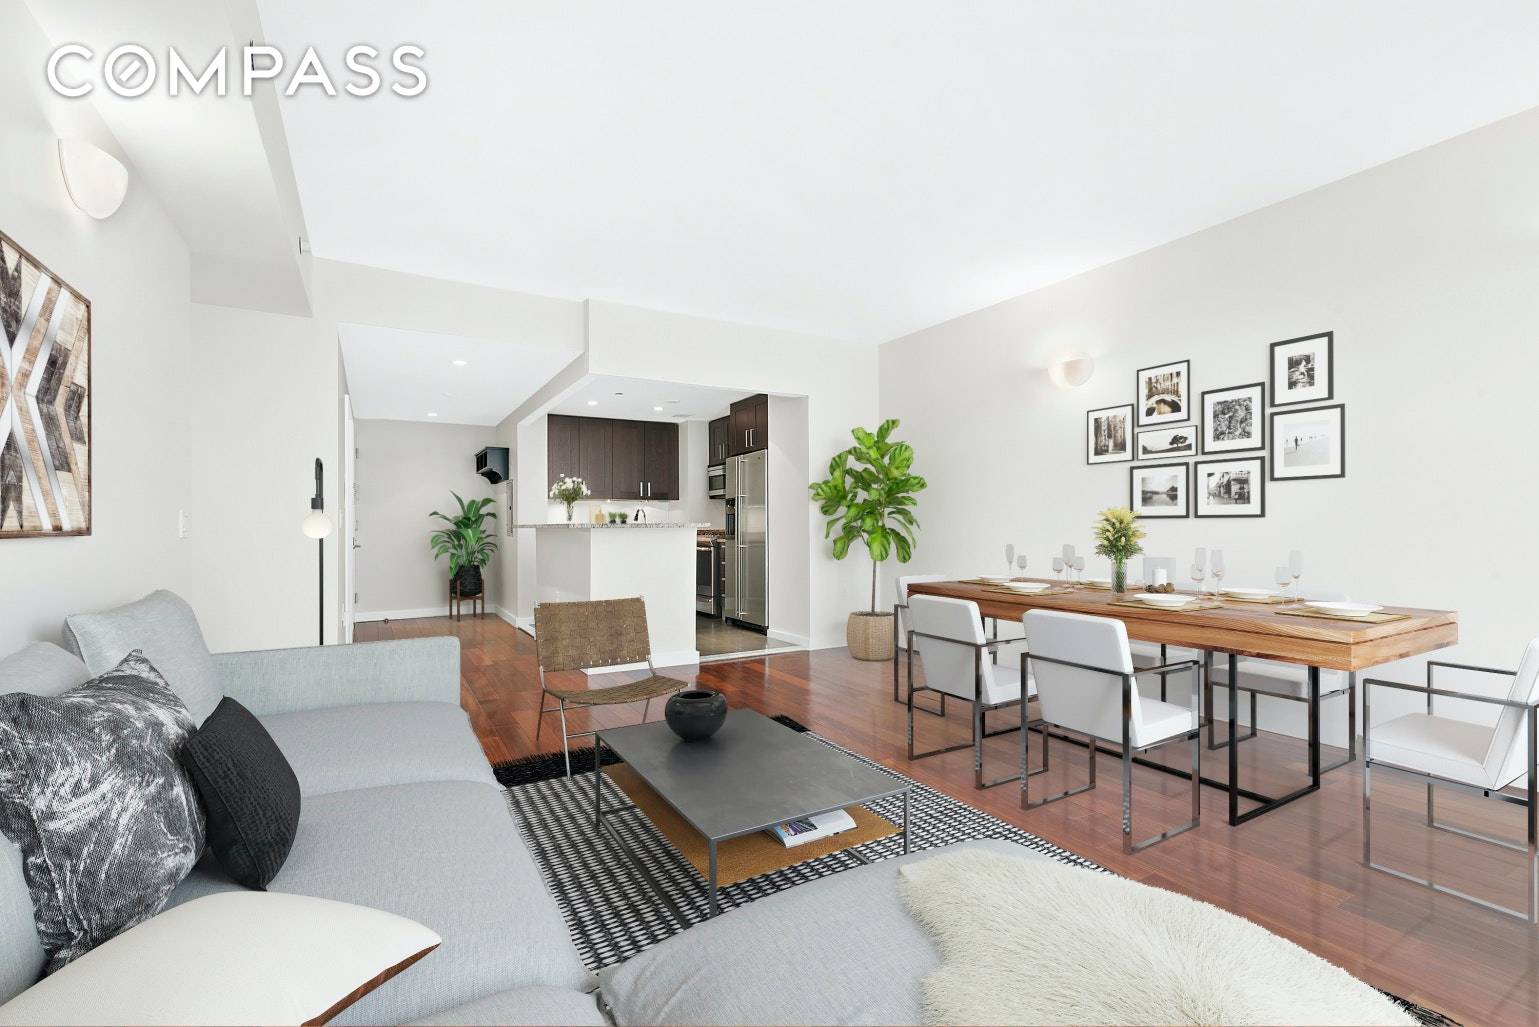 Unique opportunity to combine two adjacent apartments, 5C and 5D, to create a lovely 9.